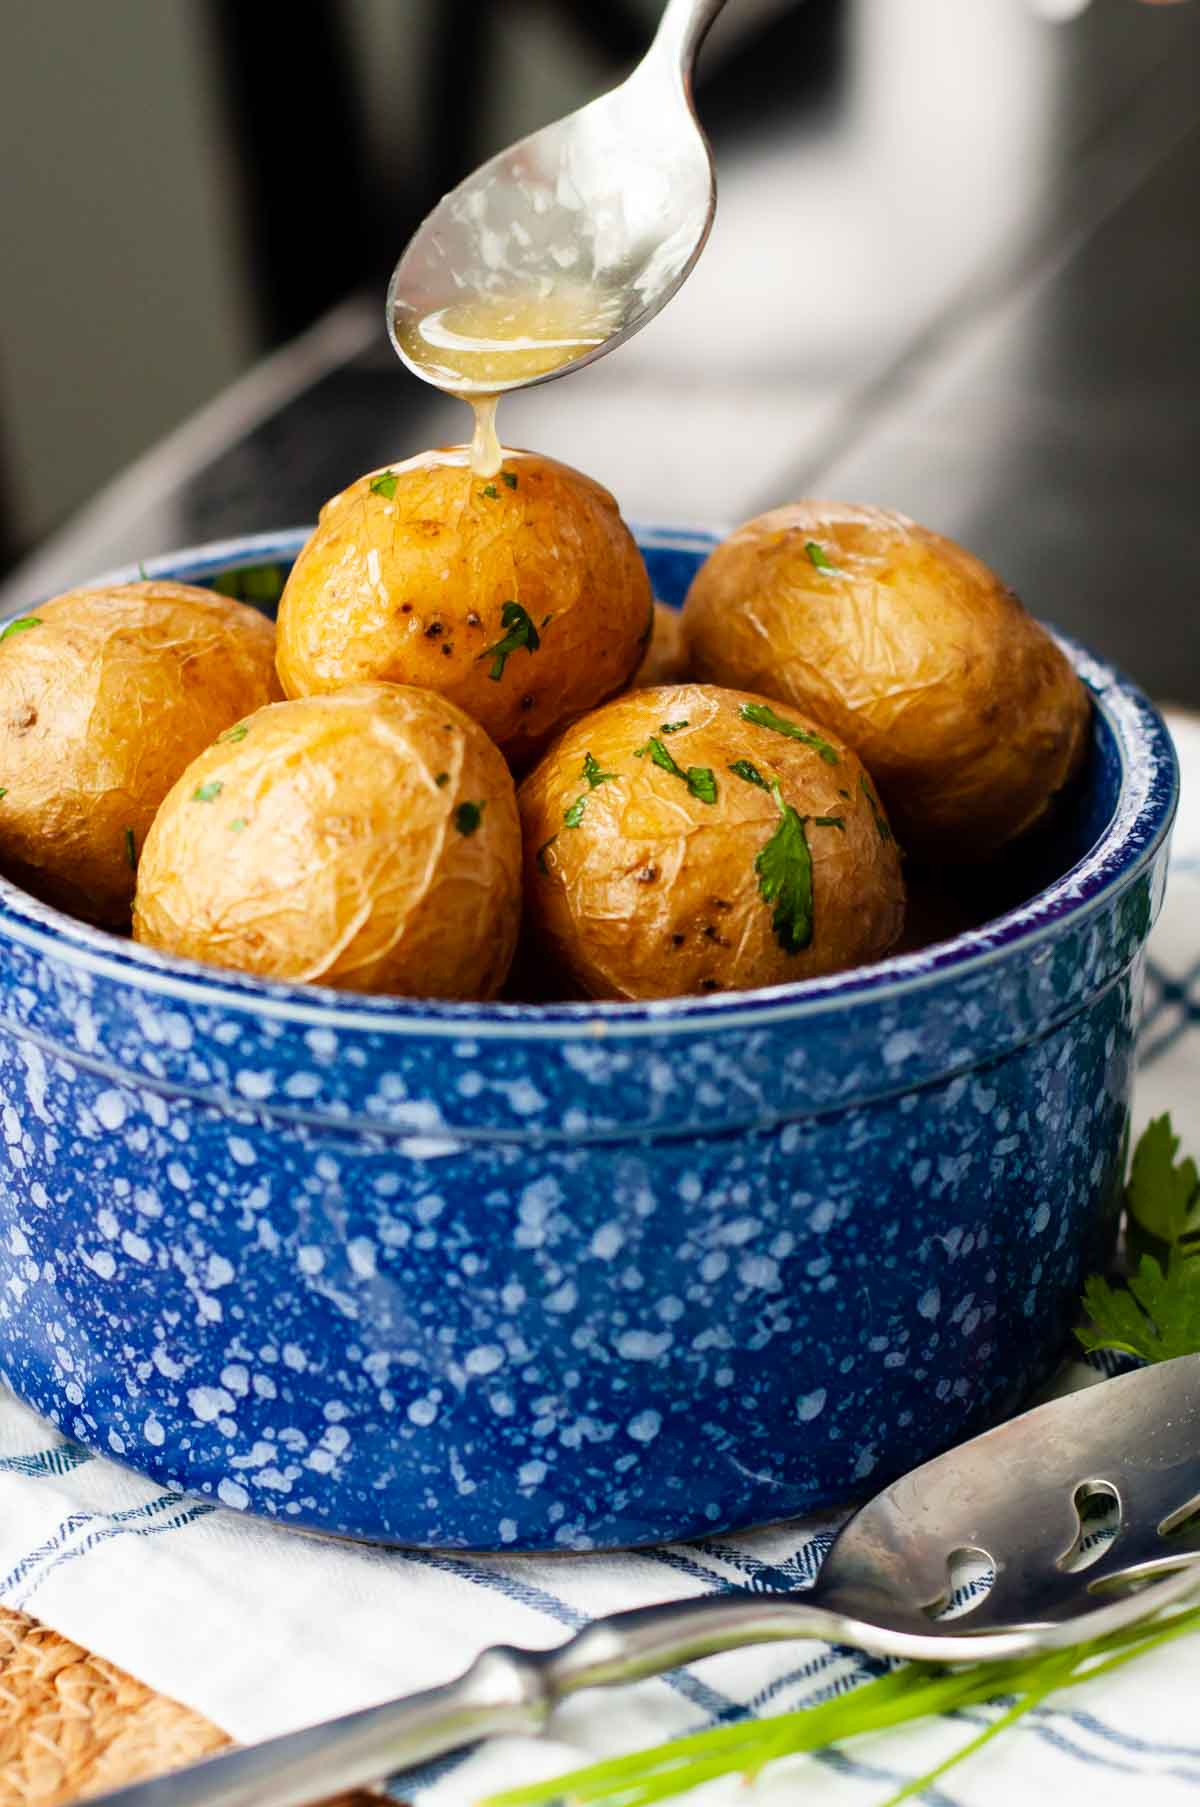 butter being spooned over a bowl of salt potatoes